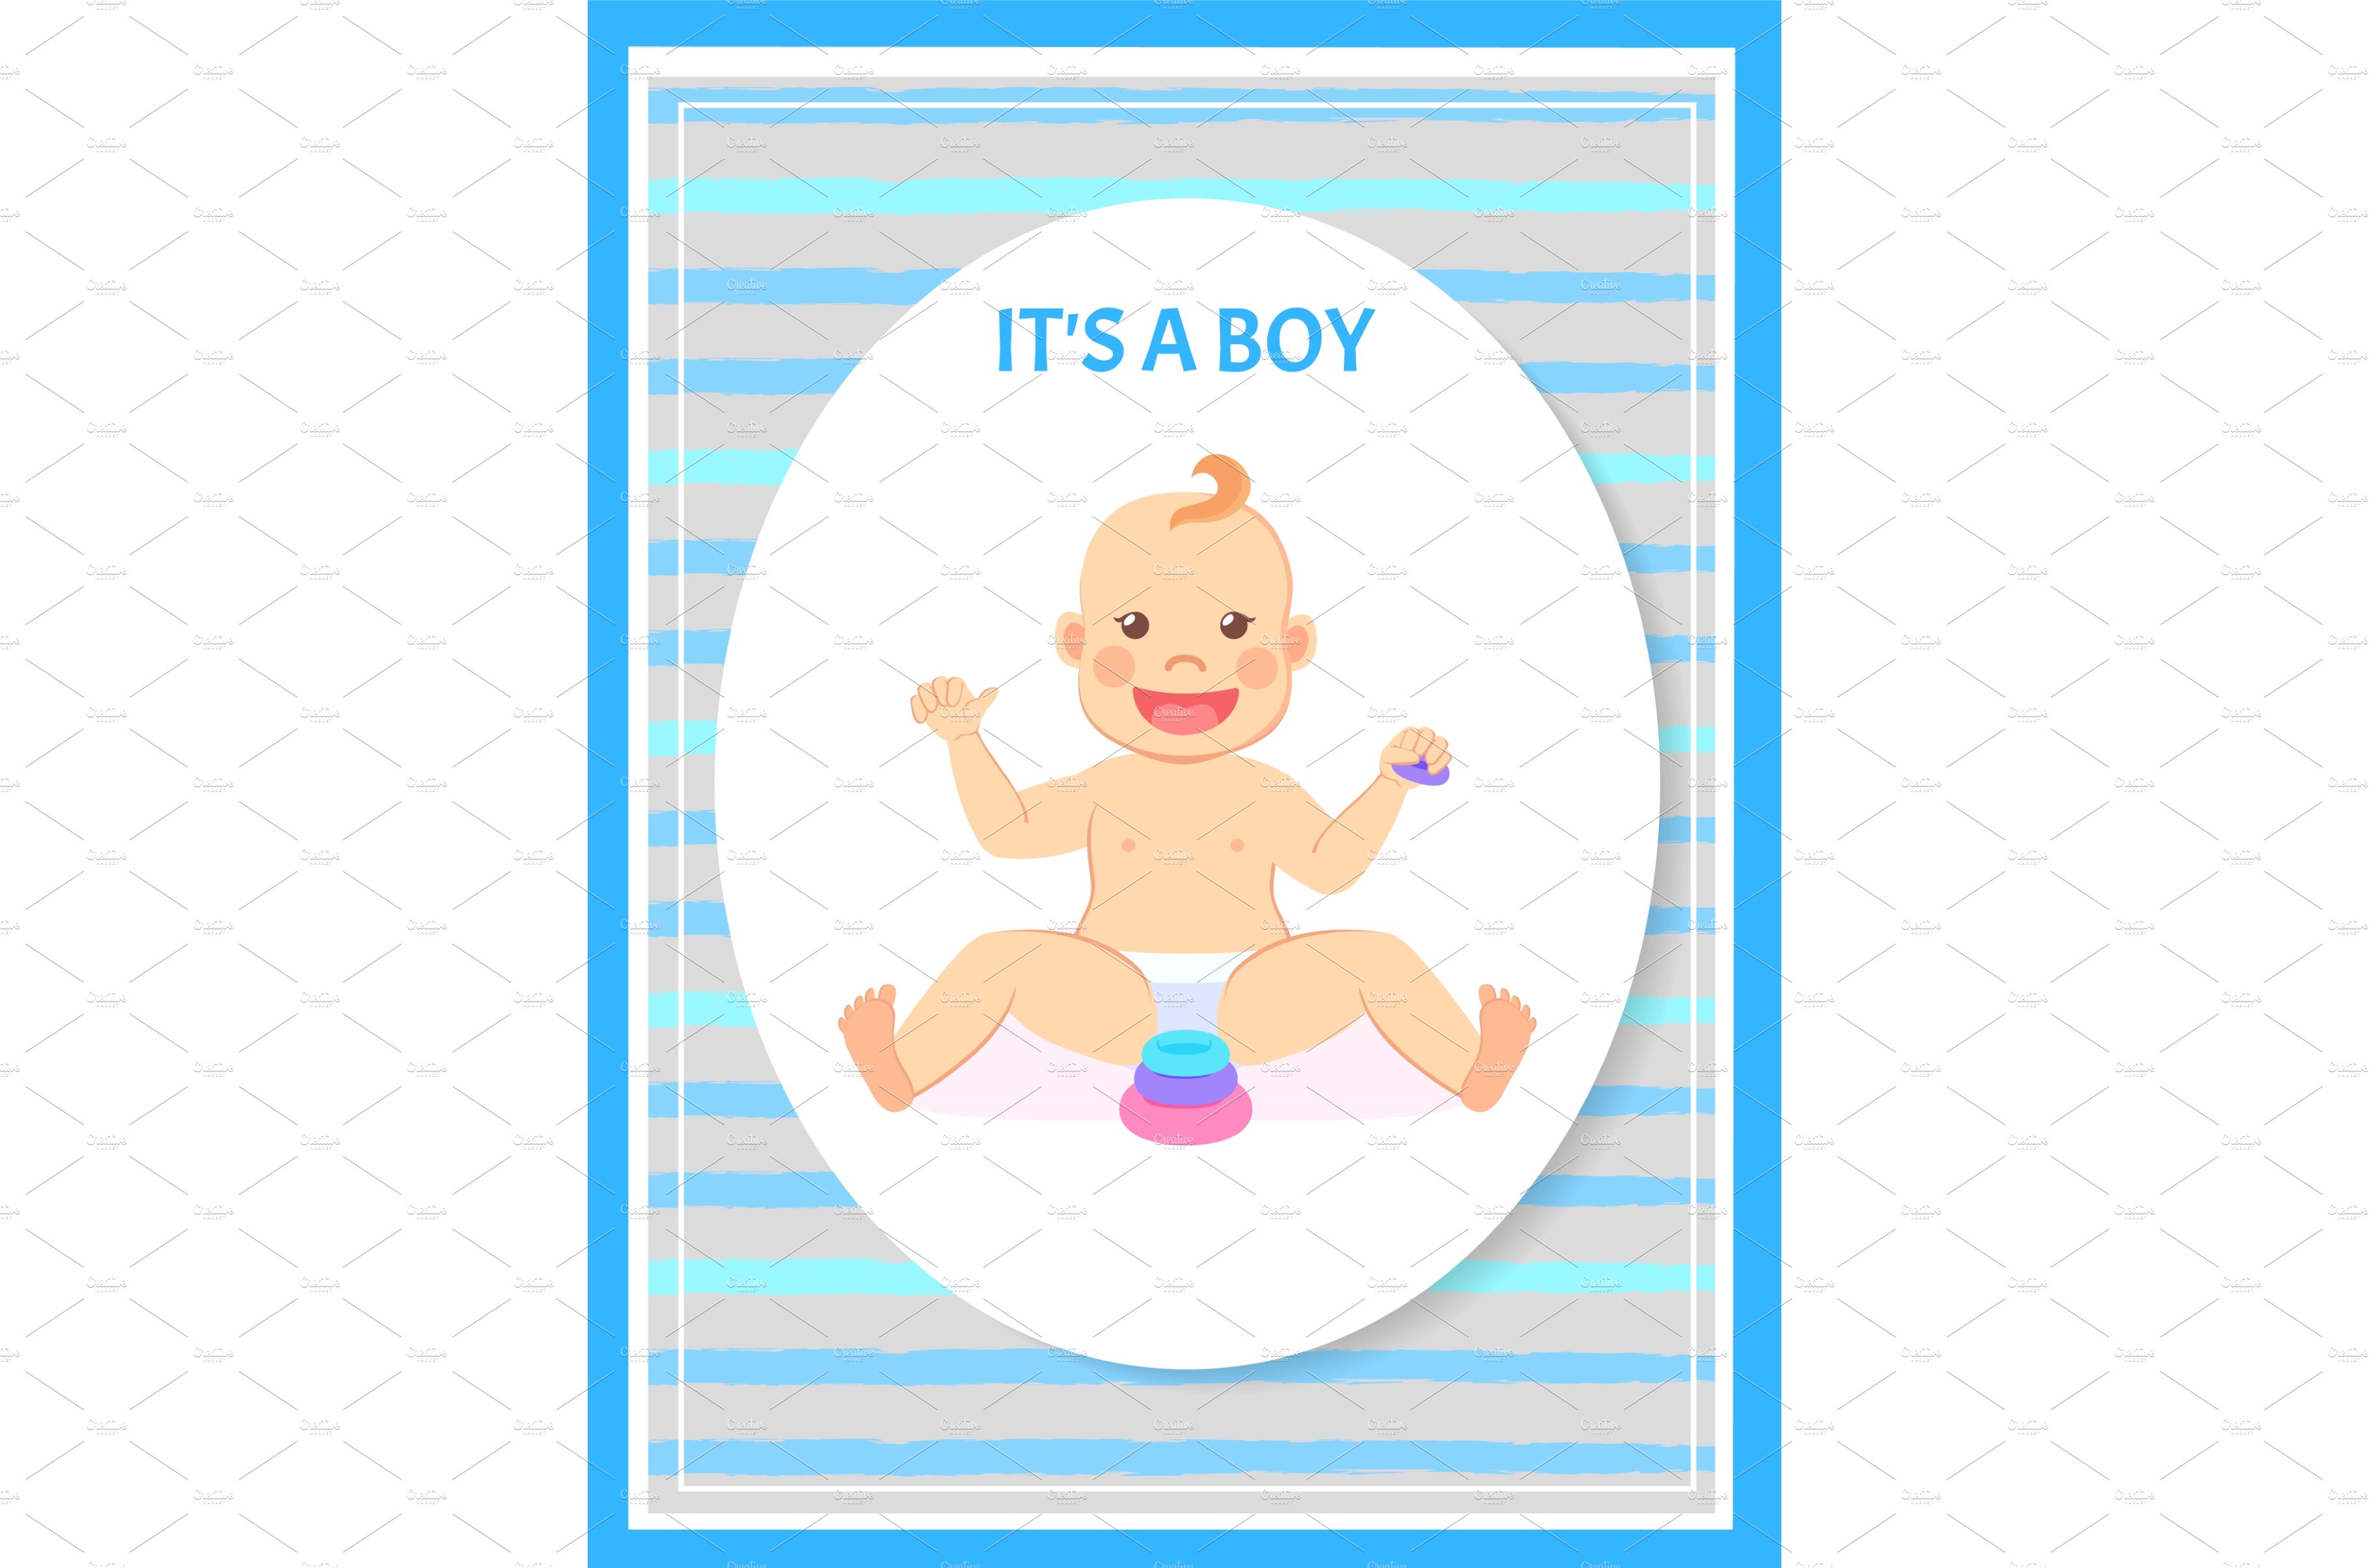 Its a Boy Greeting Card, Baby cover image.